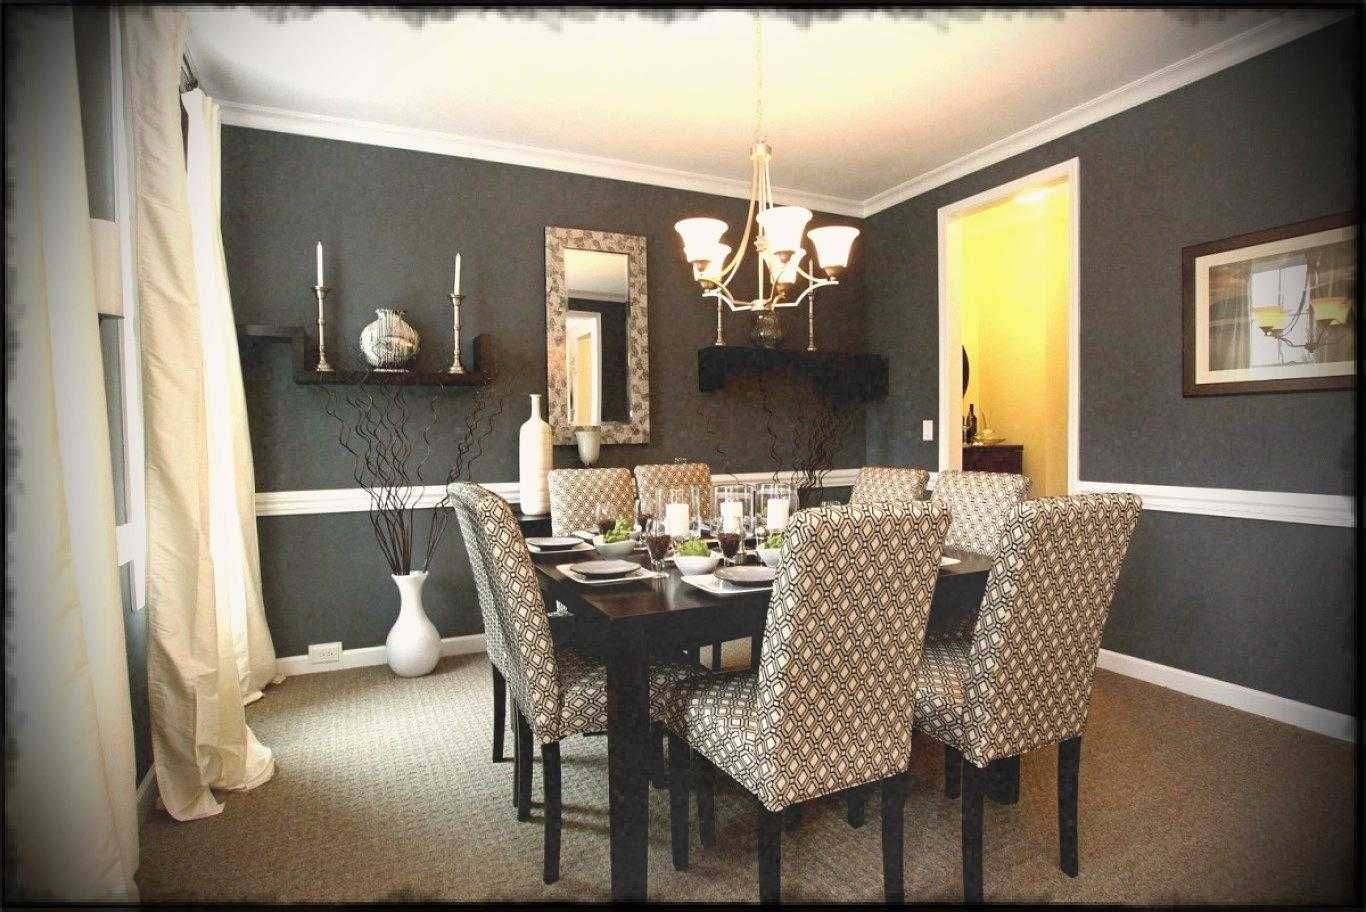 Stunning Modern Wall Art For Dining Room Collection Also Islamic Regarding Most Up To Date Chicago Wall Art (View 11 of 15)